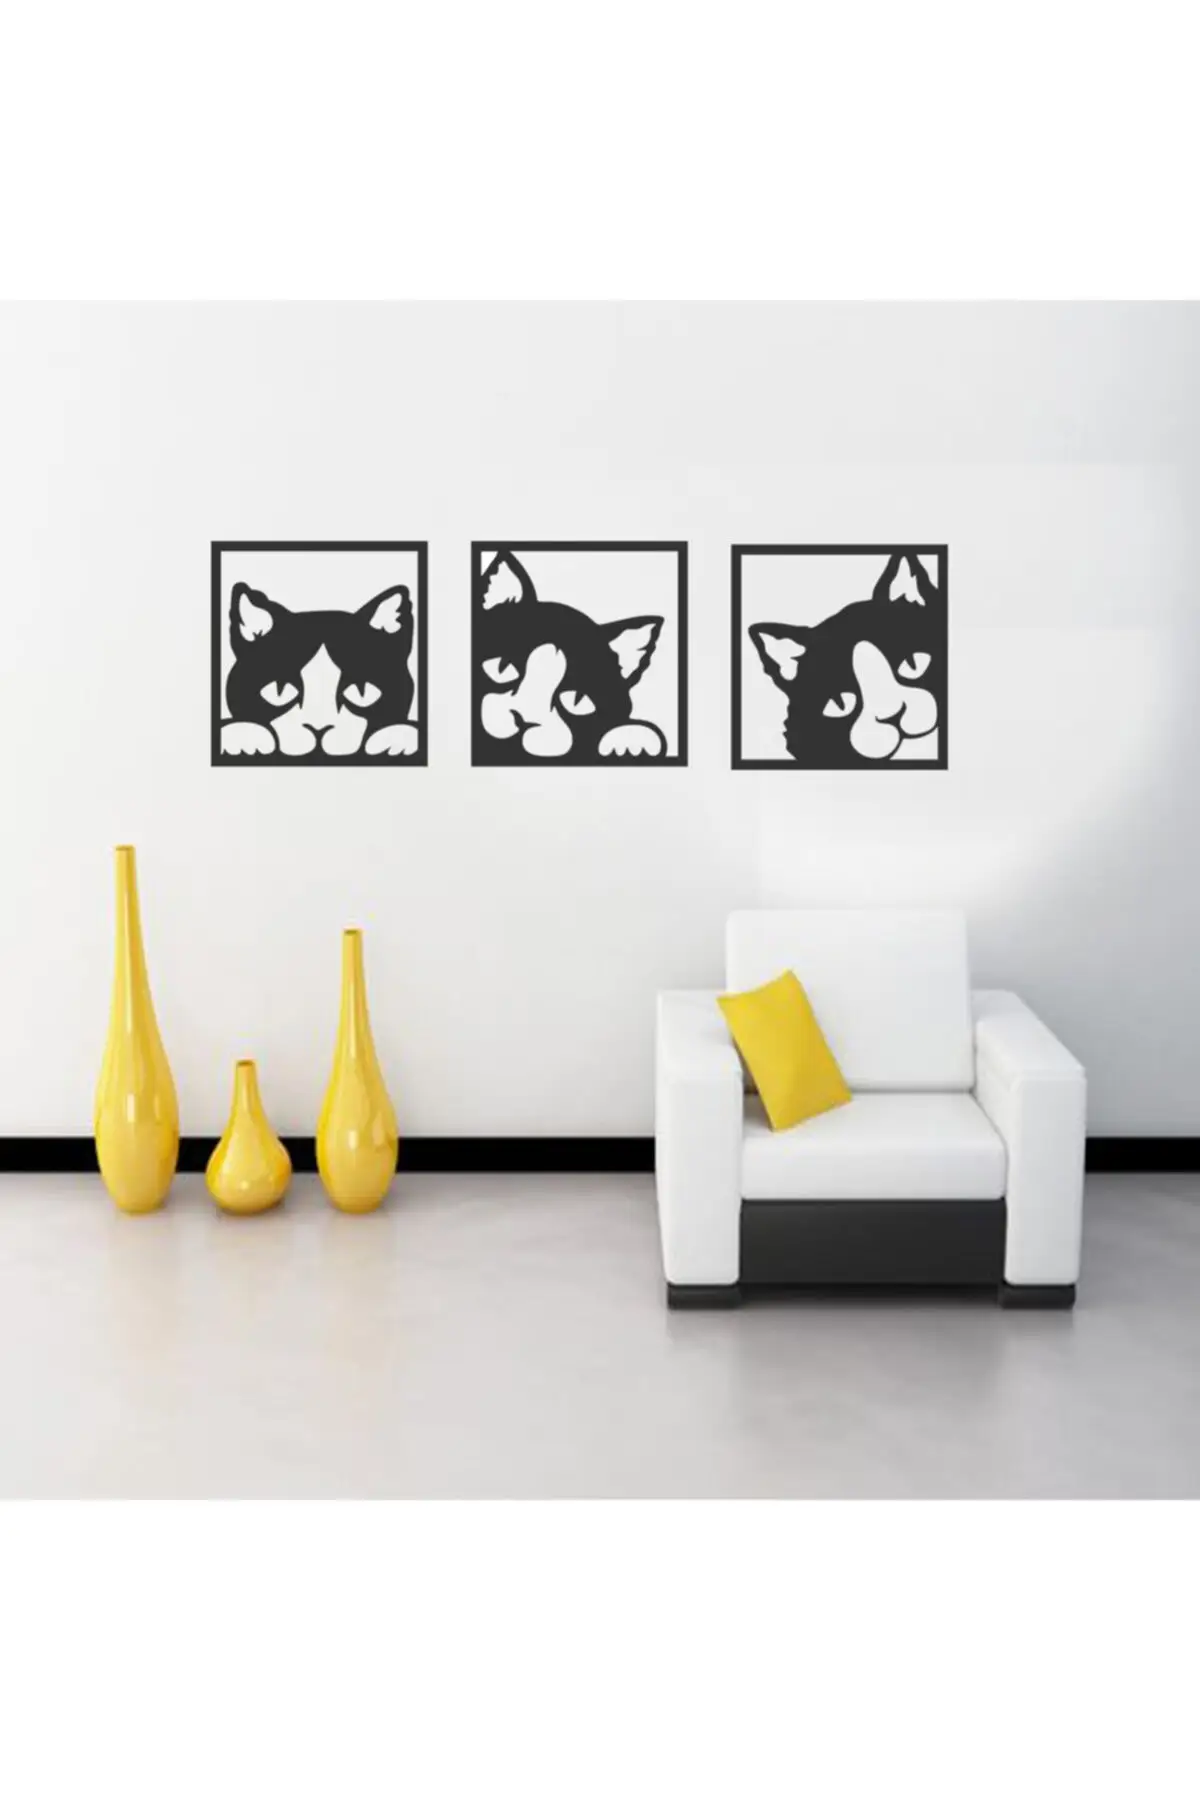 

3 Pieces Kitties Wall Decor Cute Cats Wall Decoration Wood Laser Cut Decorating Black 39x39 cm Gift Living Room